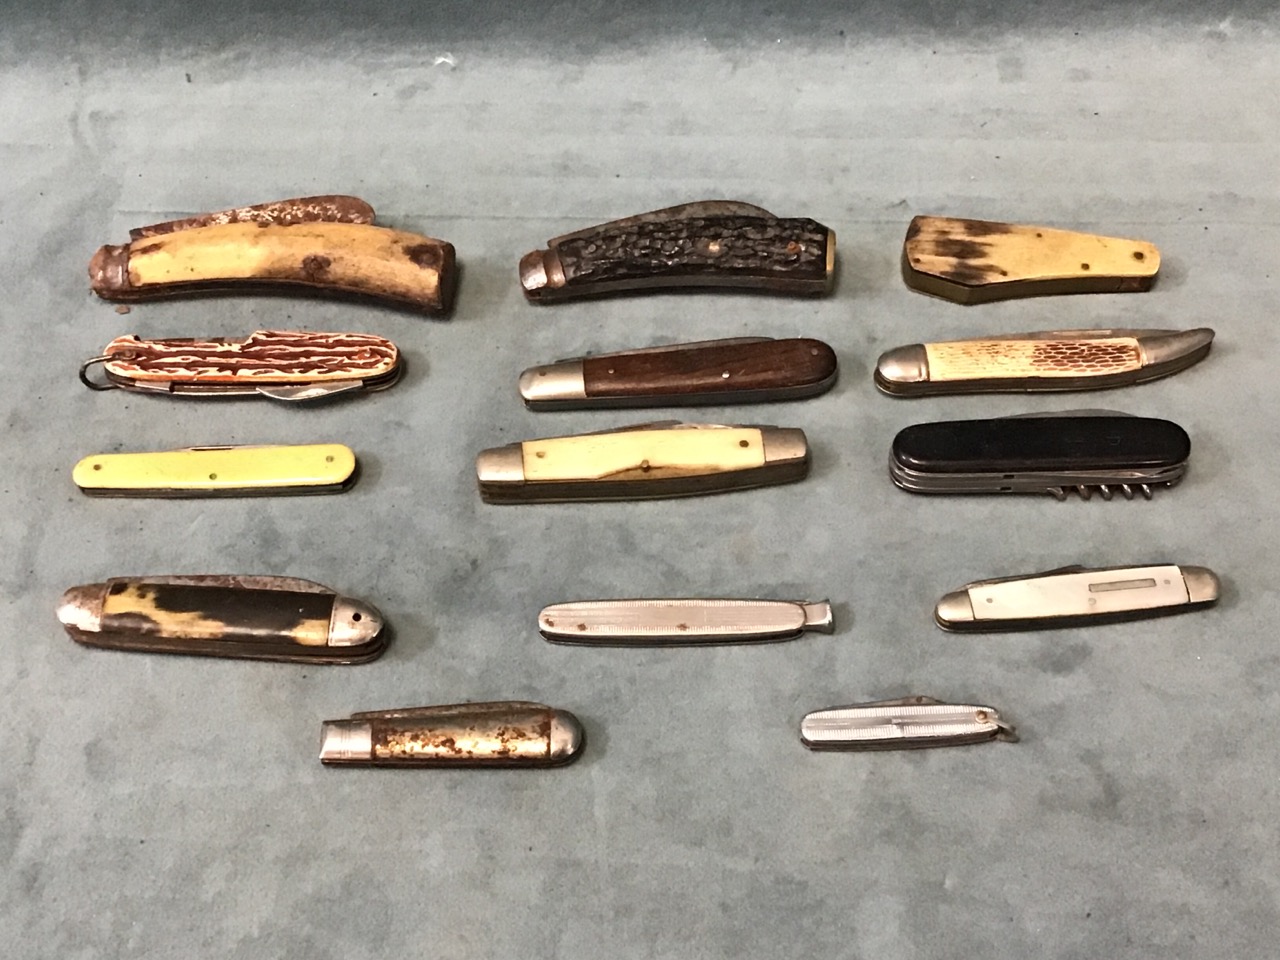 A collection of penknives - bone, antler horn, mother-of-pearl, wood and steel handled examples, a